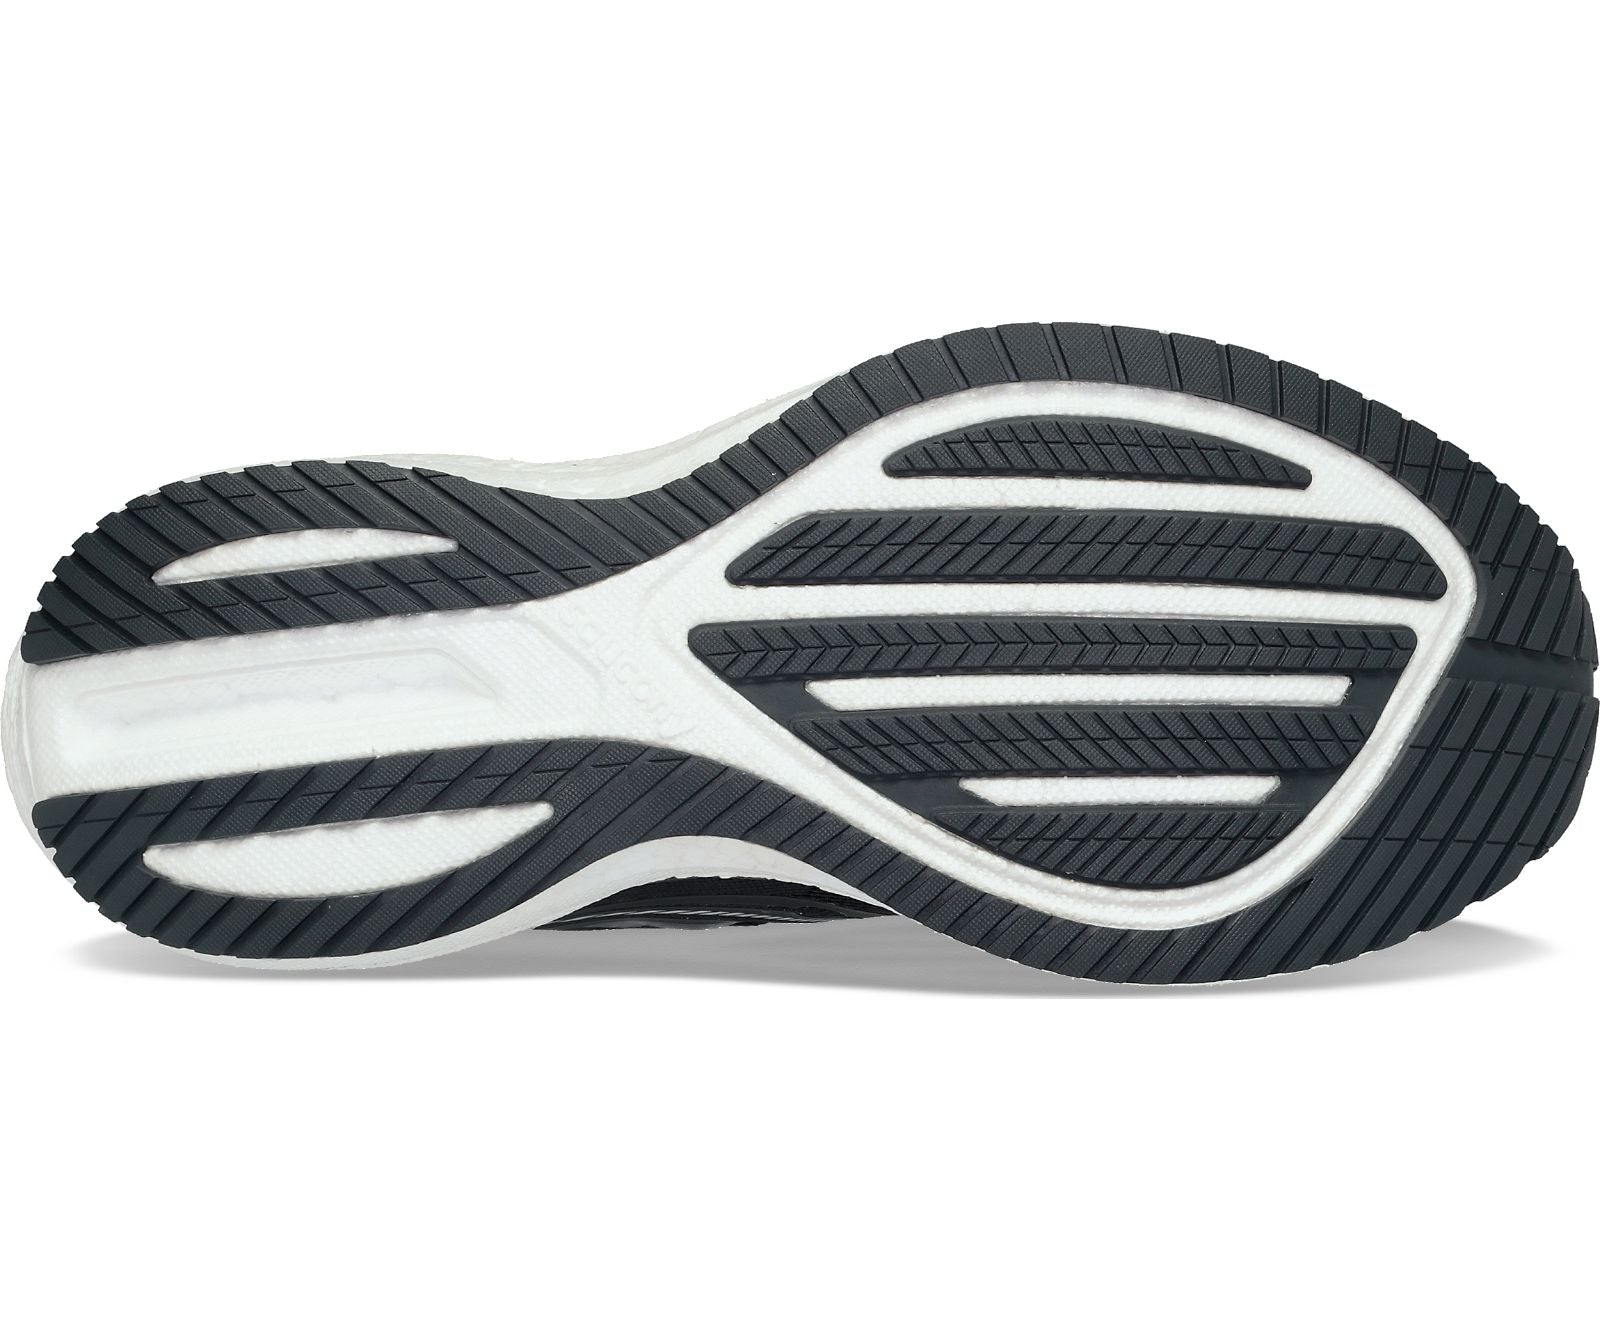 Bottom (outer sole) view of the Women's Triumph 20 in the color Black/White